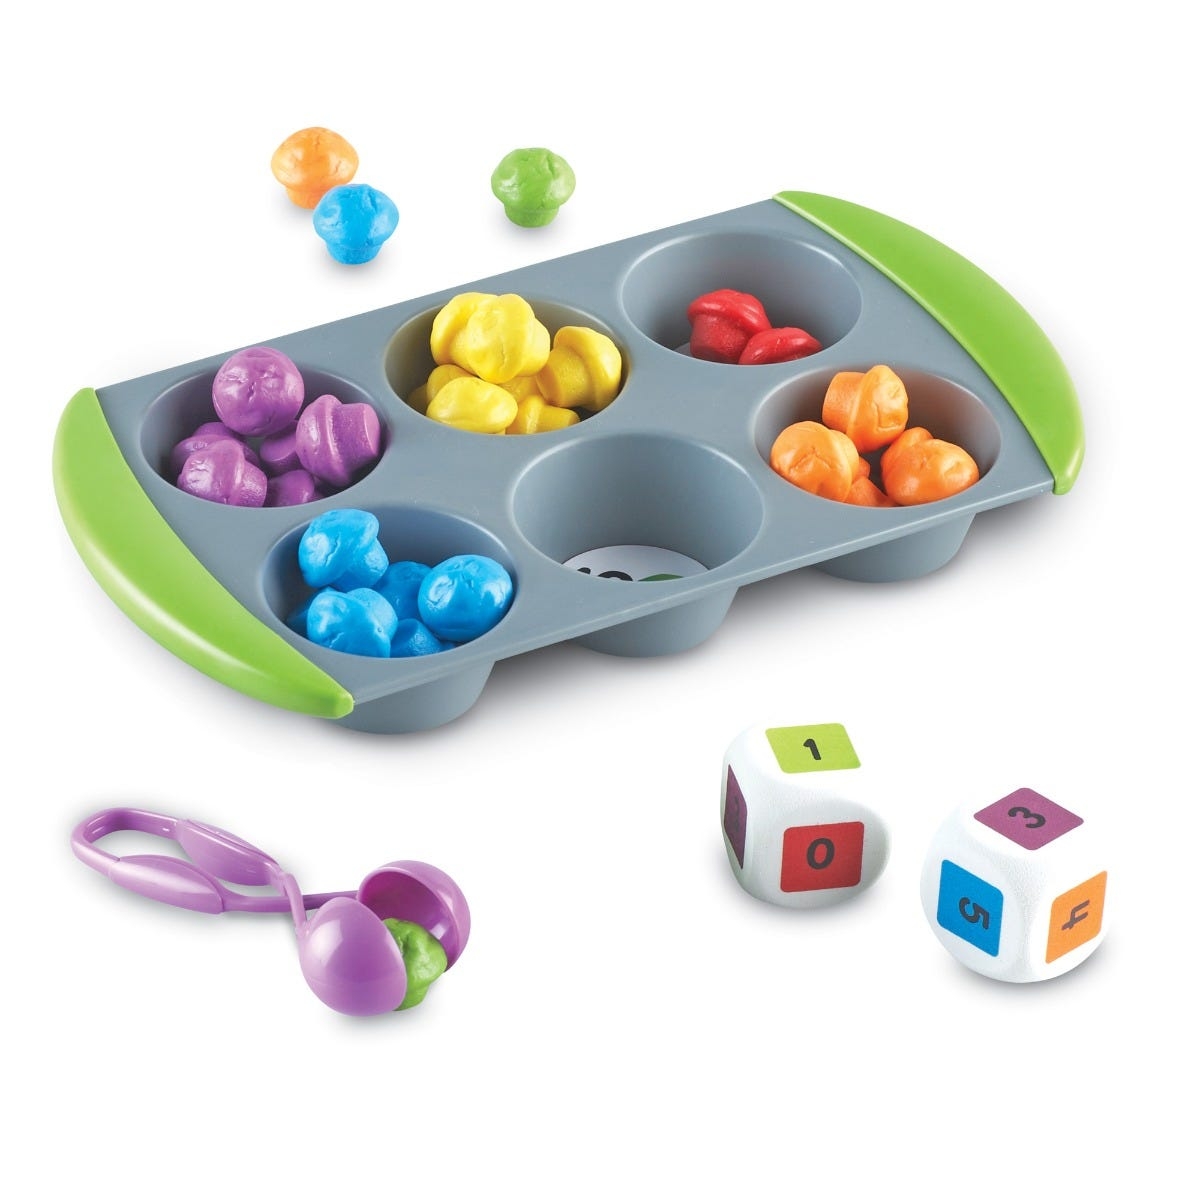 LR Mini Muffin Match Up – Vocational/ Learning Toys For Children Aged 3-8 Years